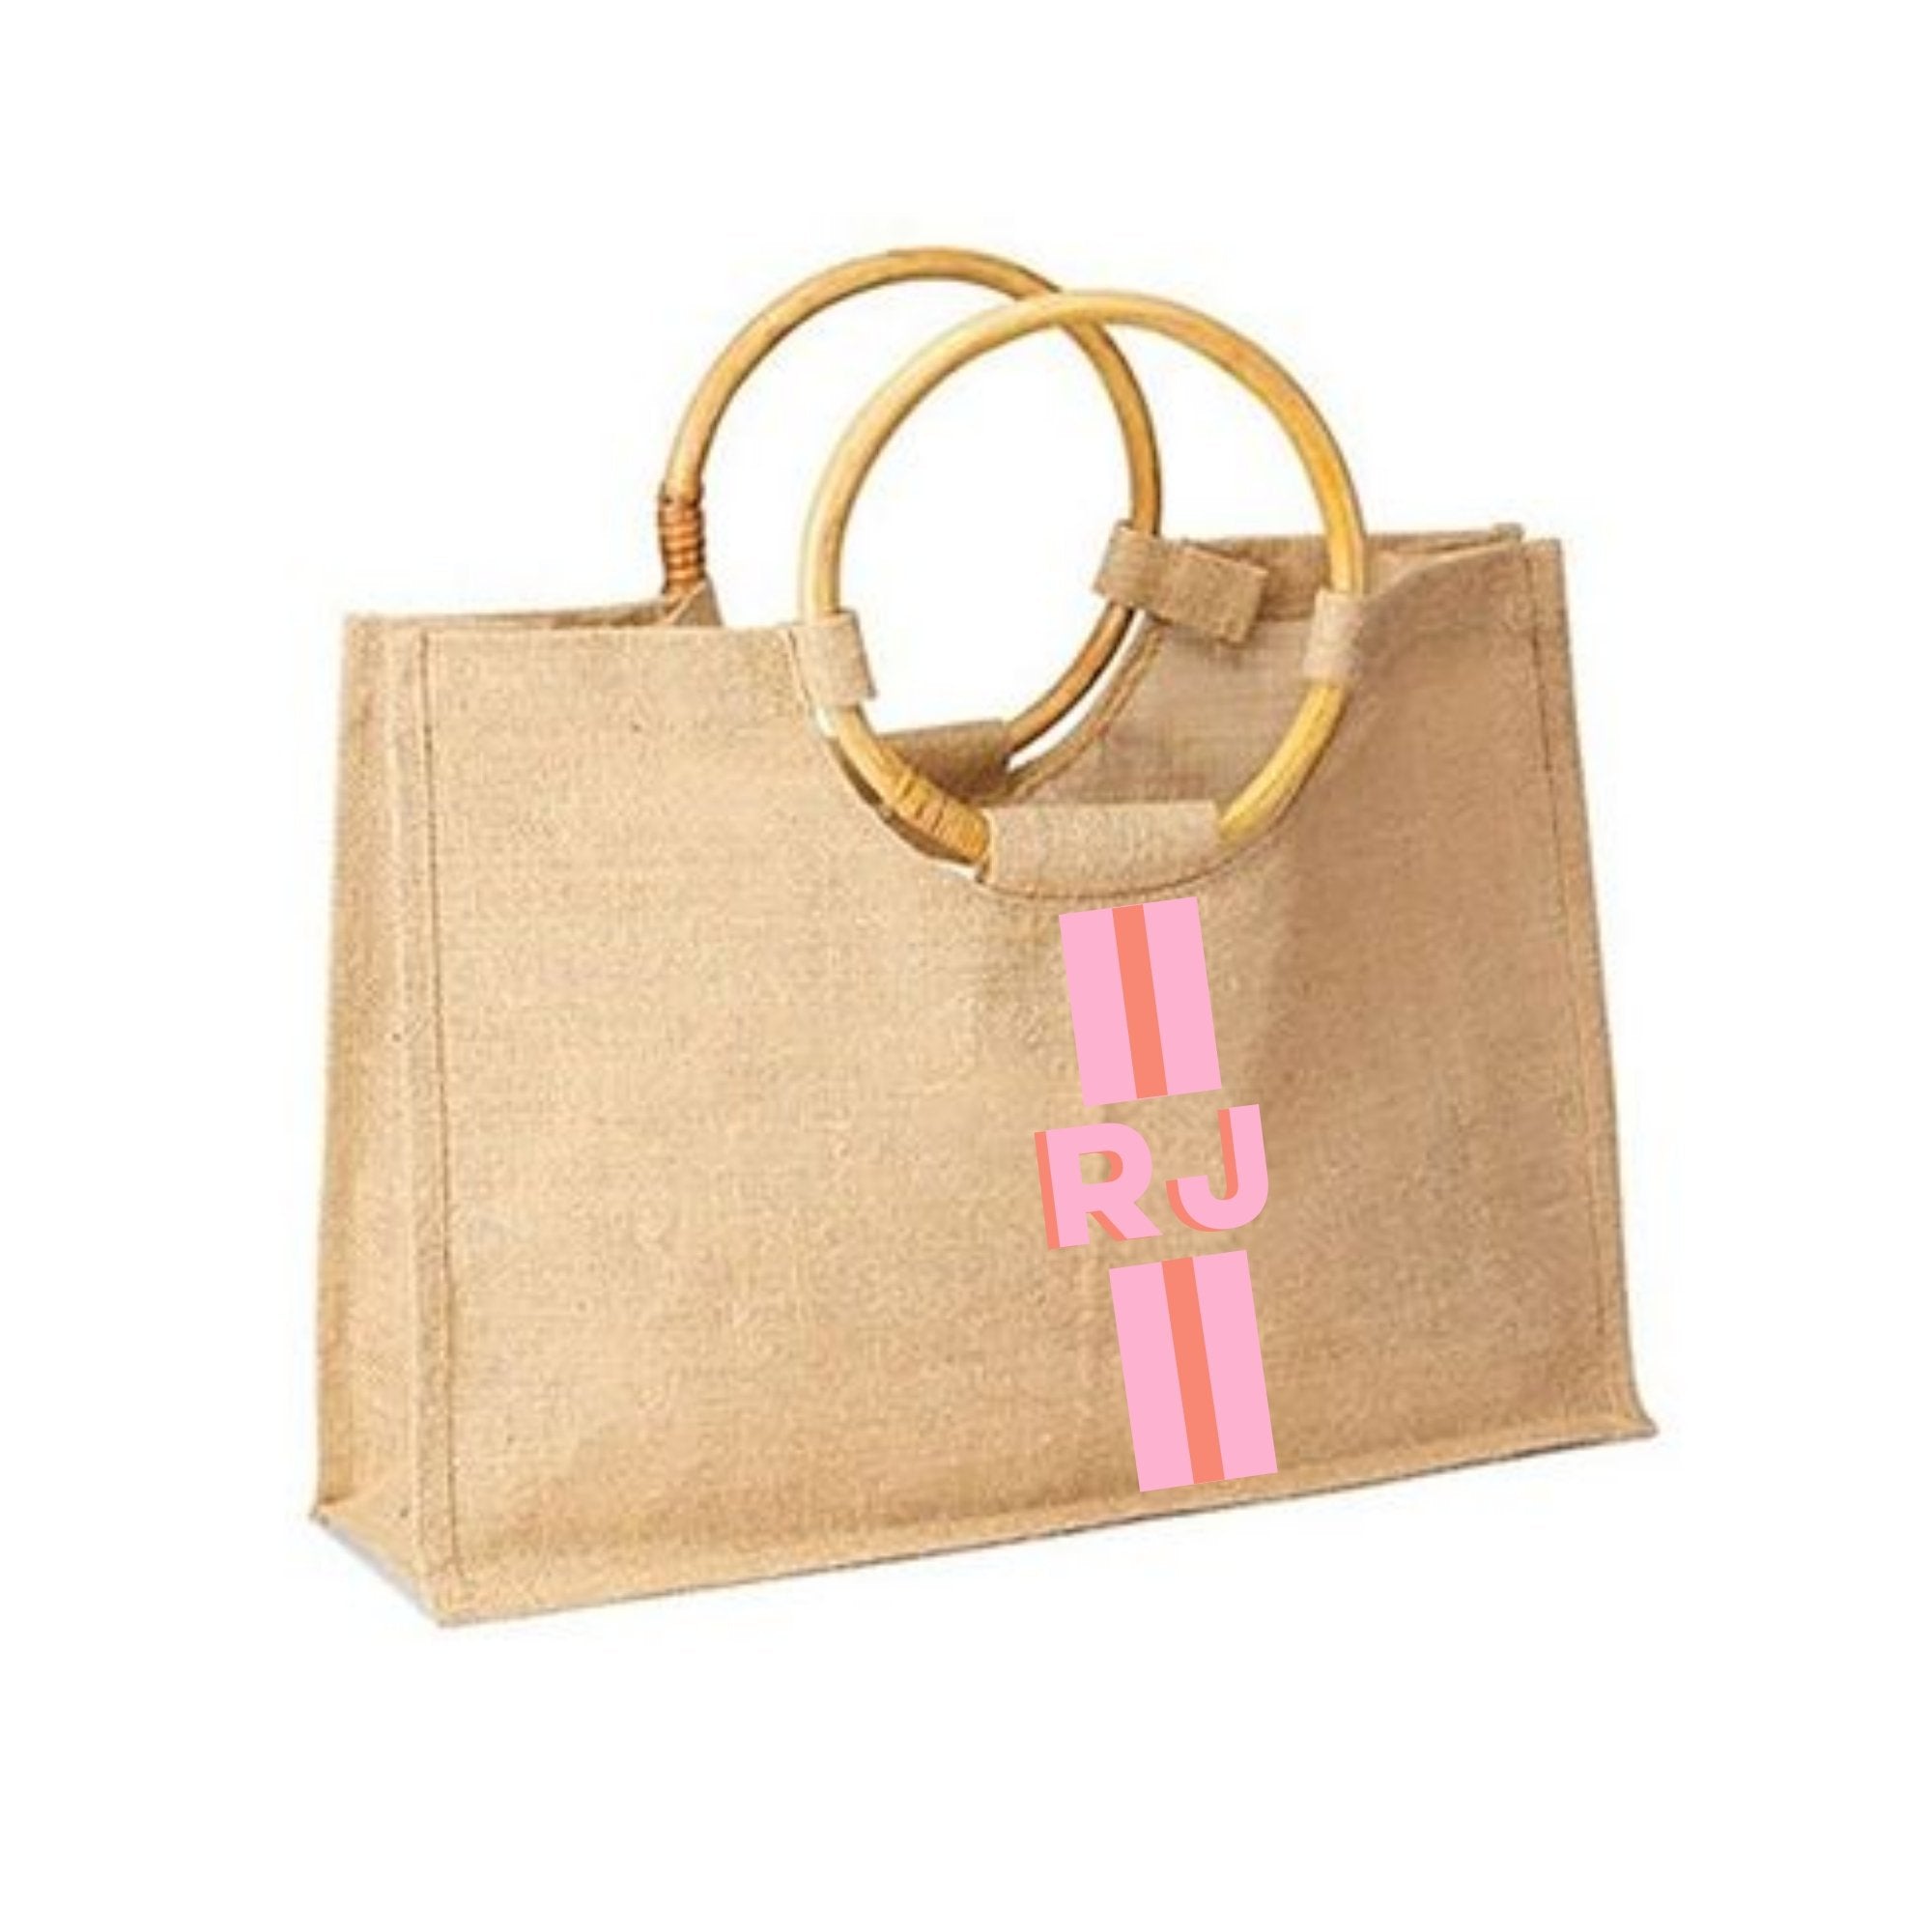 A bamboo jute bag is customized with a pink and melon stripe and monogram 